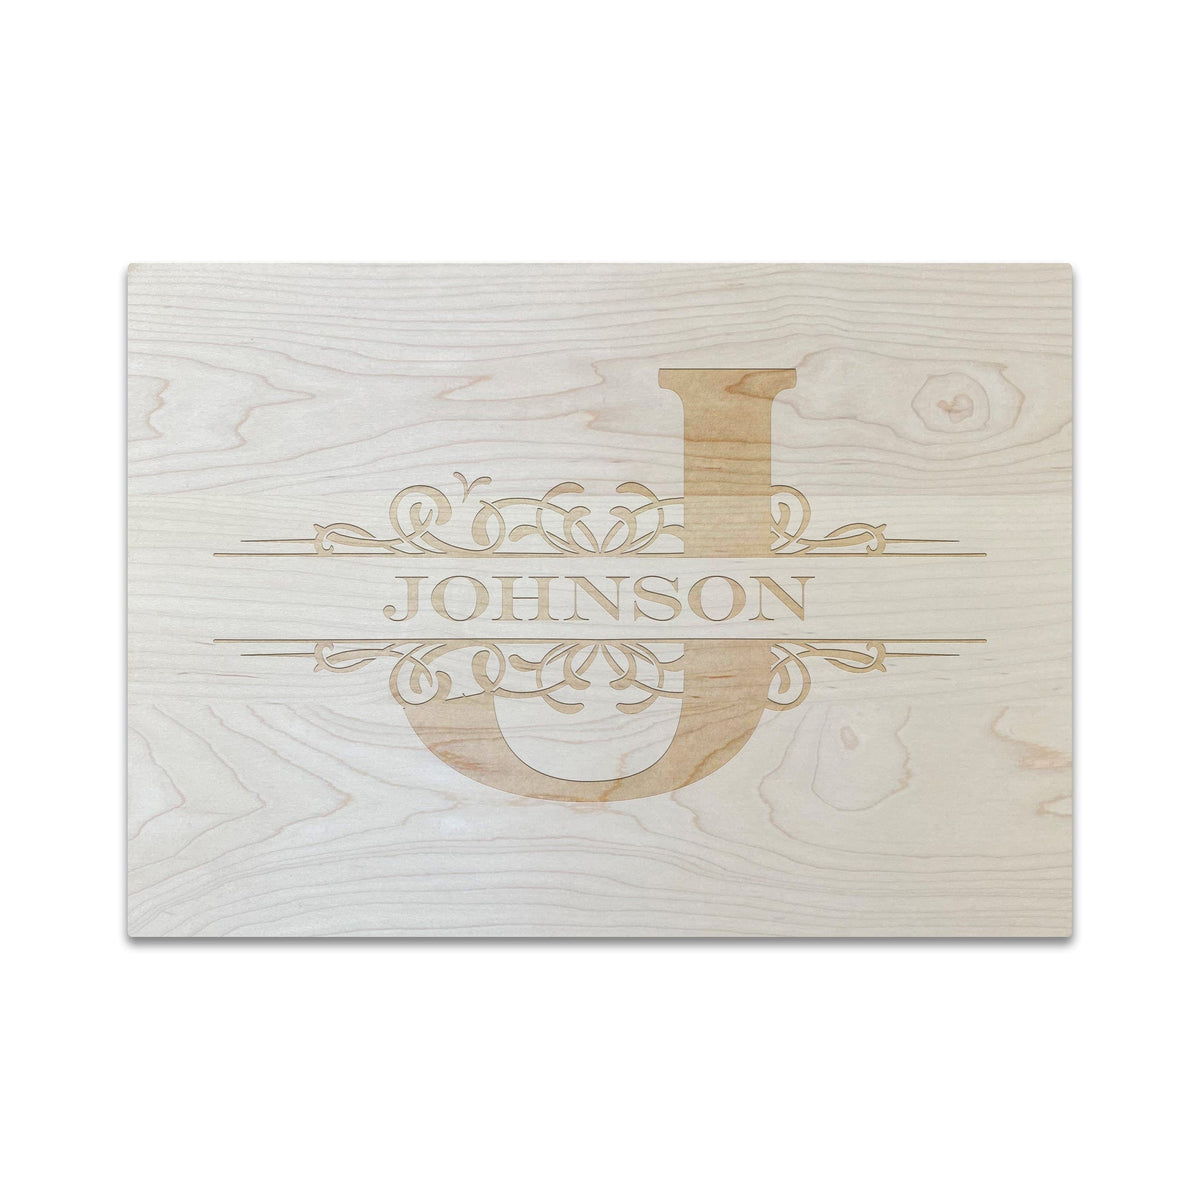 Monogram laser engraved cutting board personalized gift